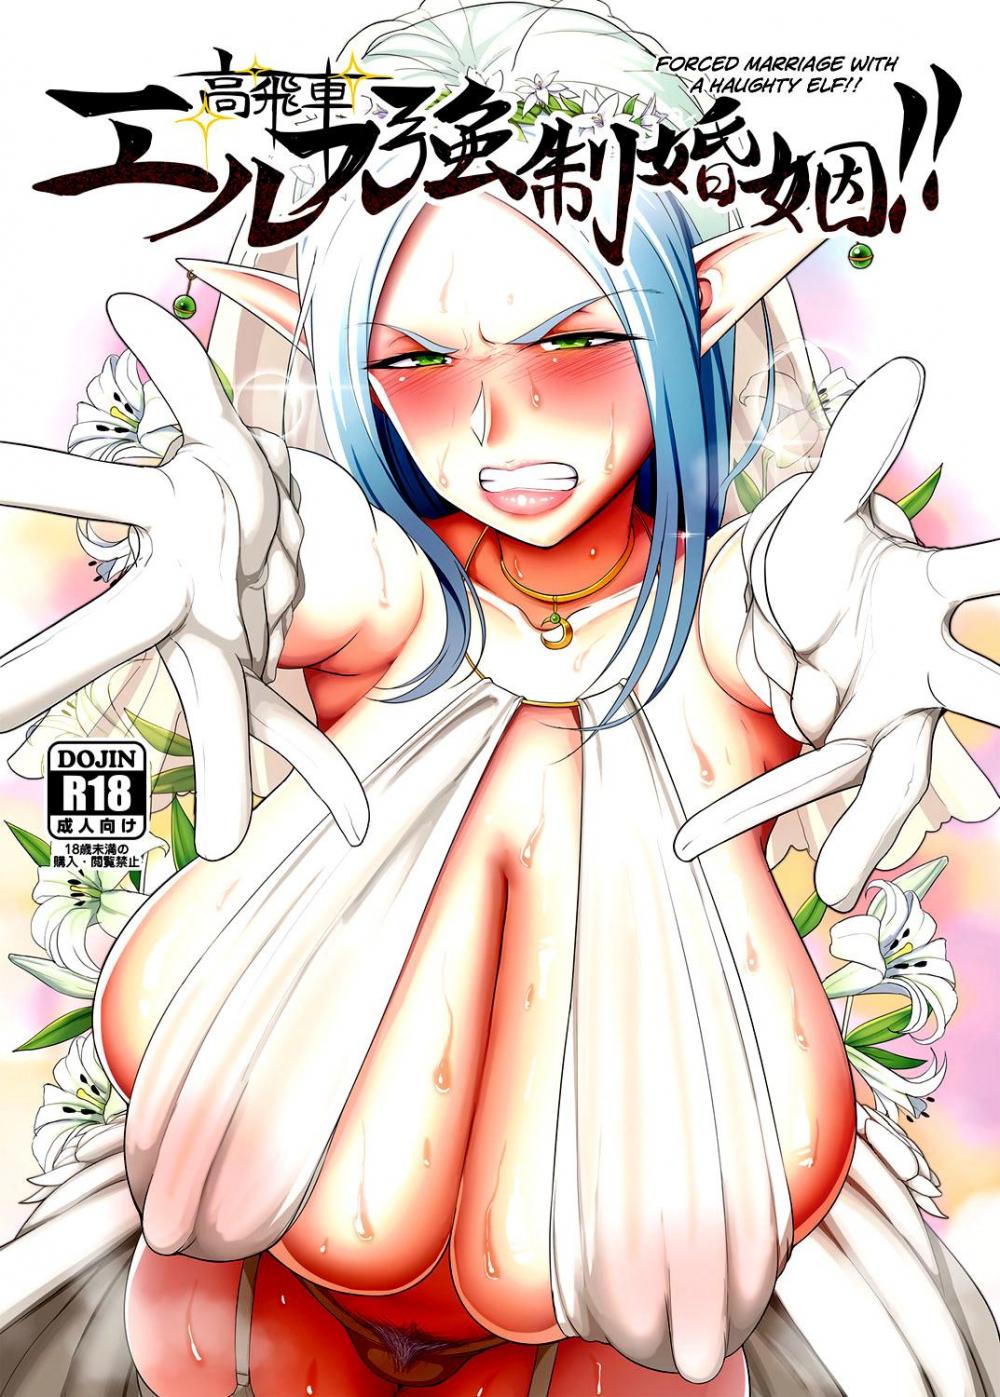 Hentai Manga Comic-Force Married With A Haughty Elf!!-Chapter 1-1